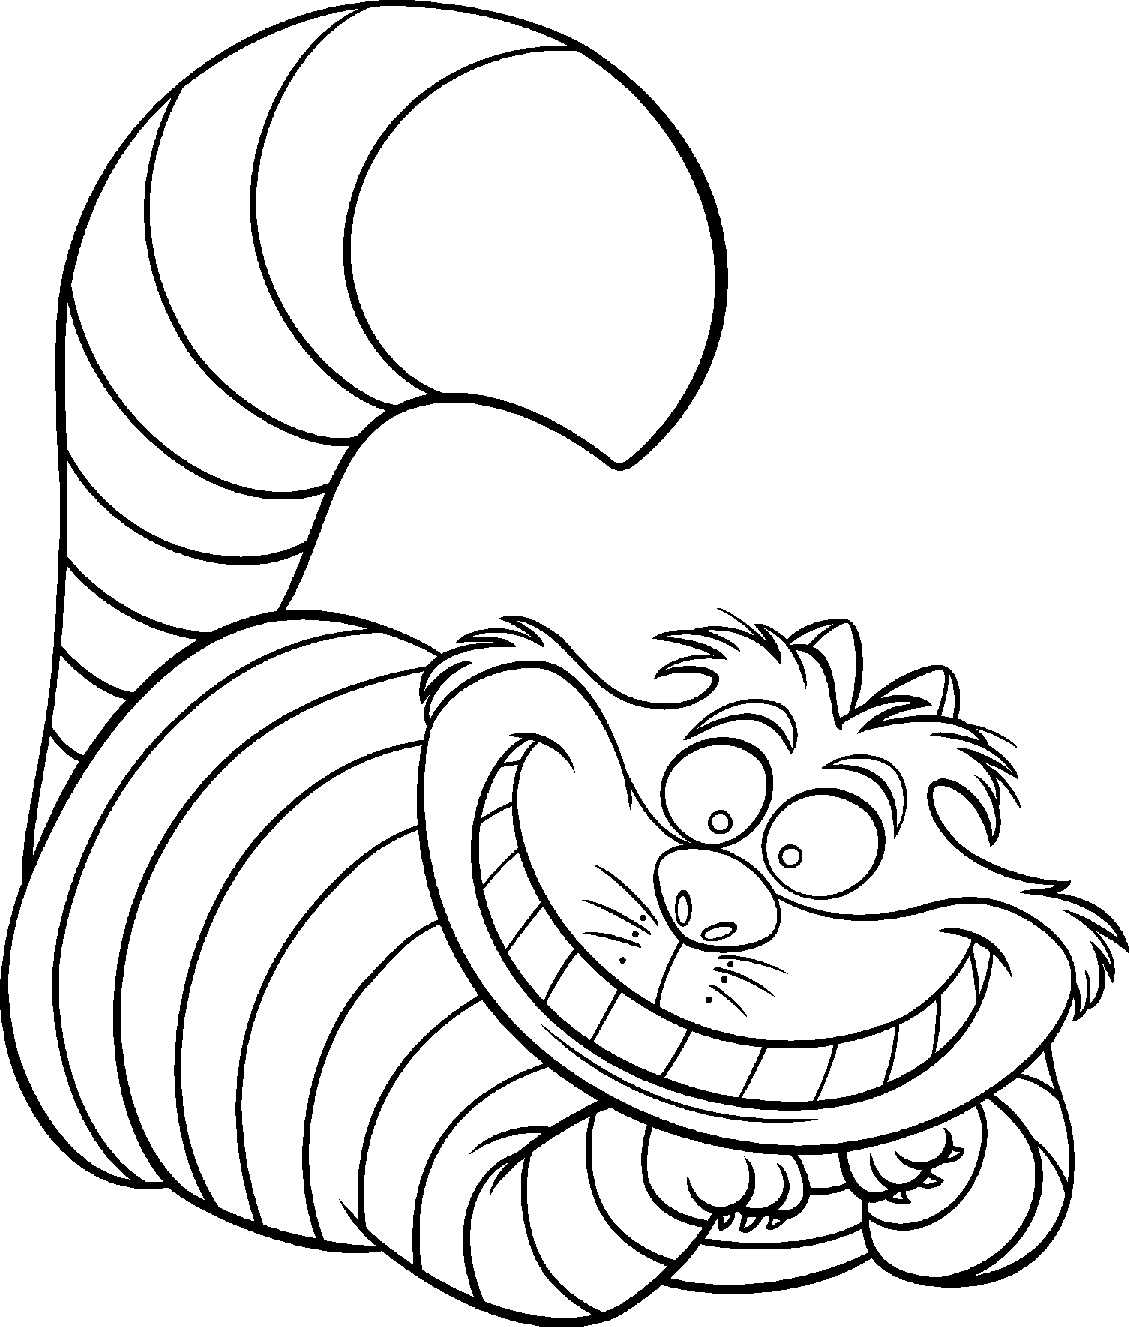 Disney Coloring Pages Coloring Wallpapers Download Free Images Wallpaper [coloring654.blogspot.com]